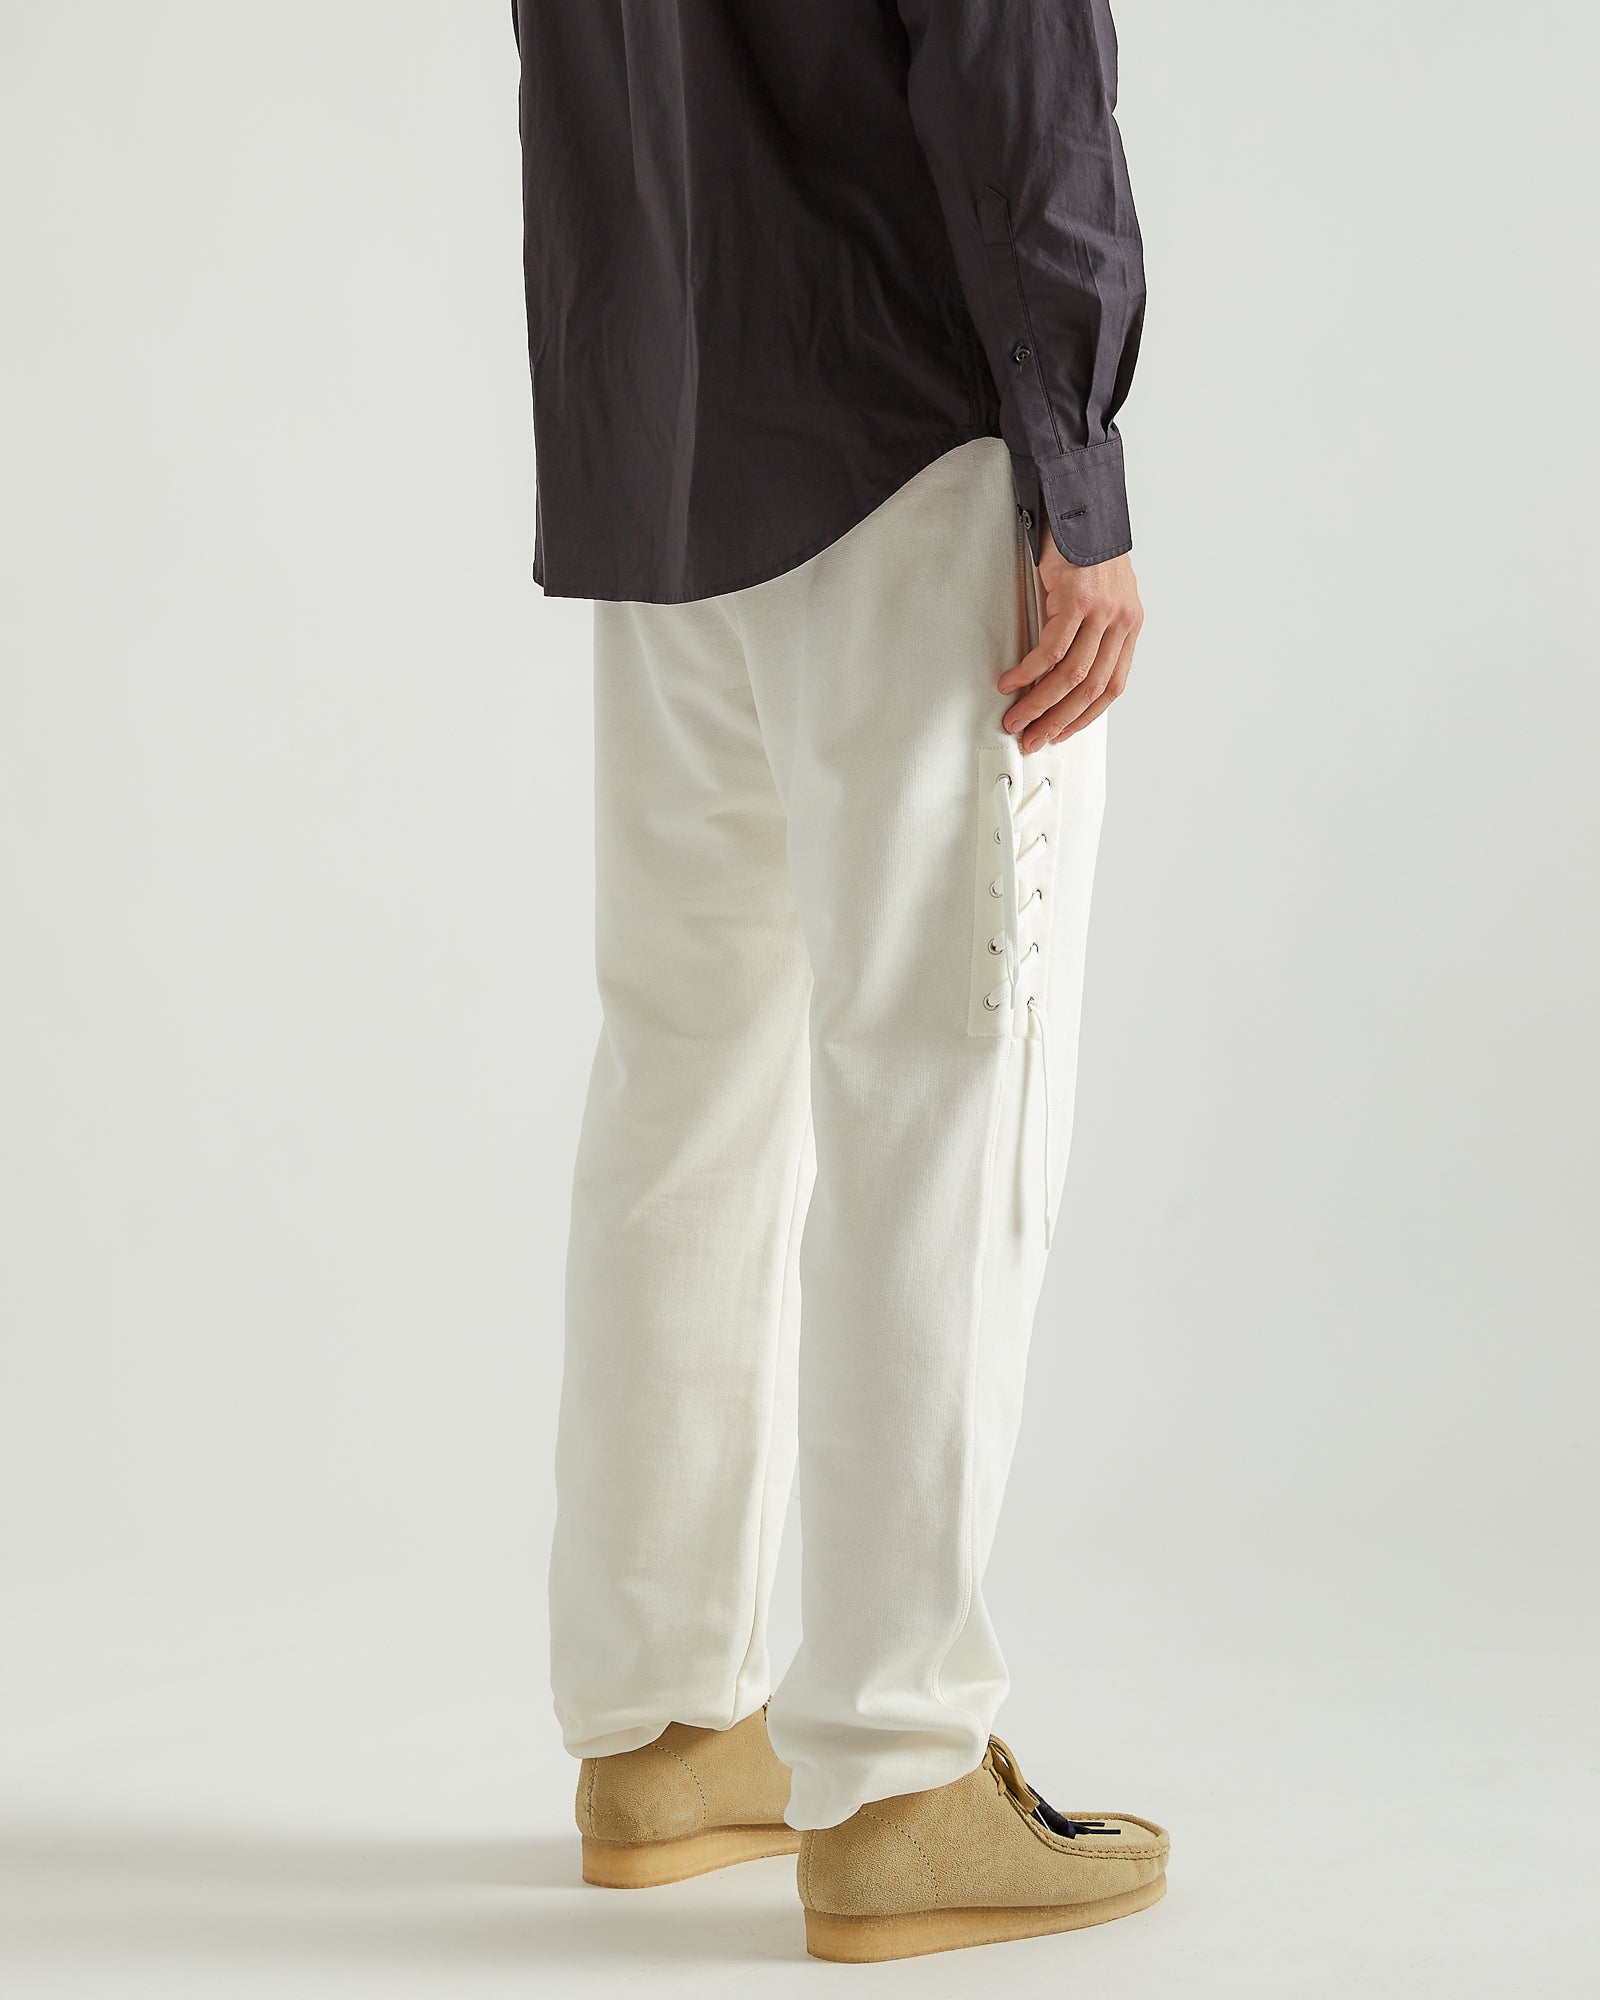 Laced Sweatpant in White